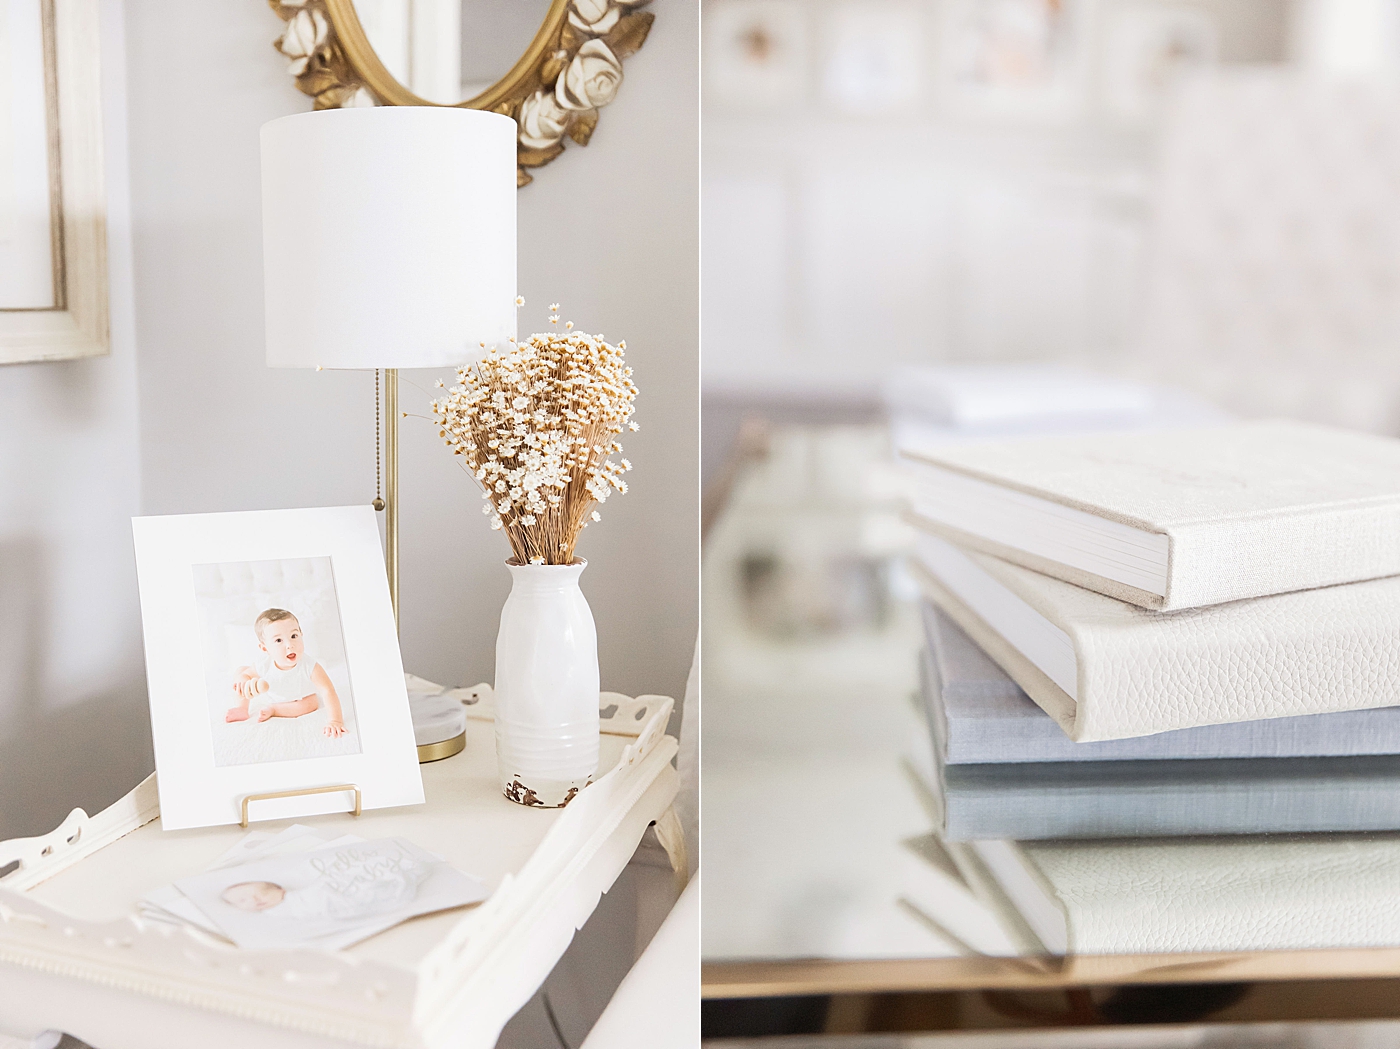 Gift ideas for grandparents - matted prints and albums. Photo by Fresh Light Photography.